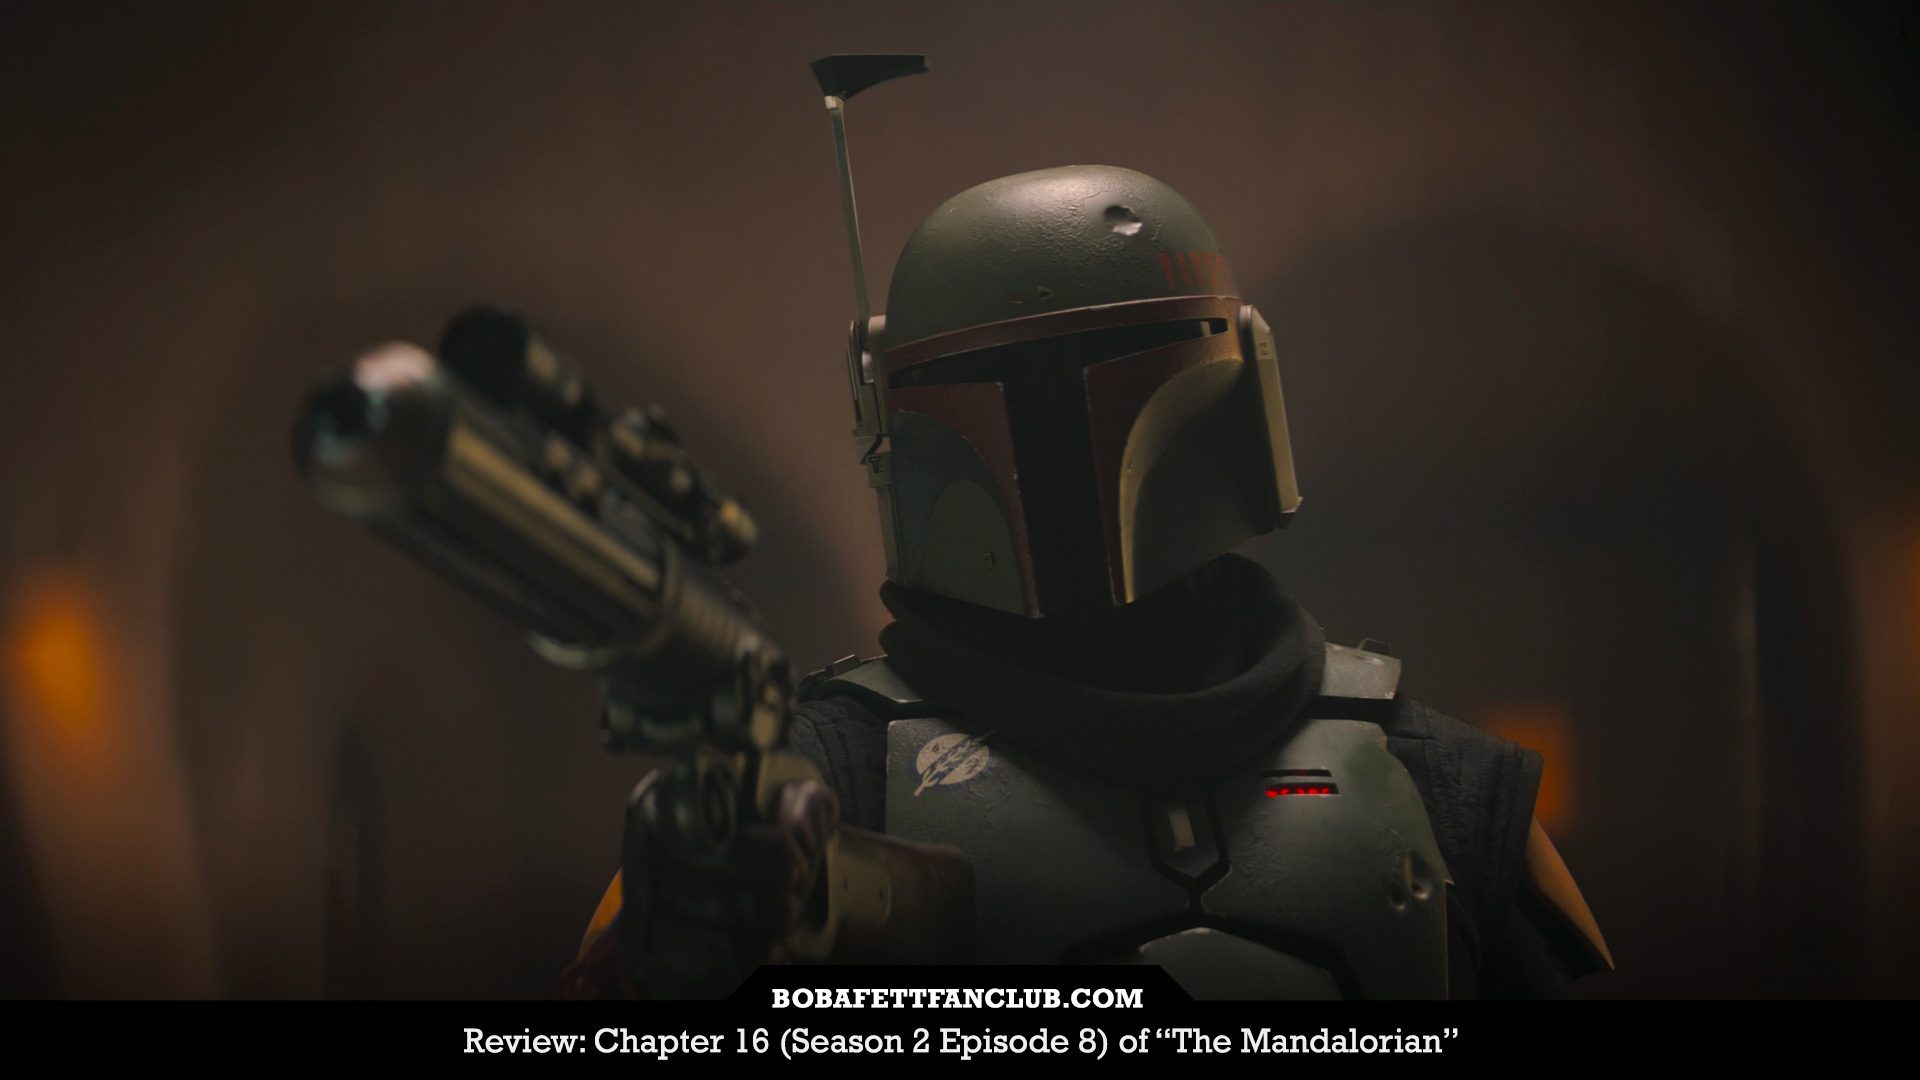 Review: Chapter 16 (Season 2 Episode 8) of “The Mandalorian